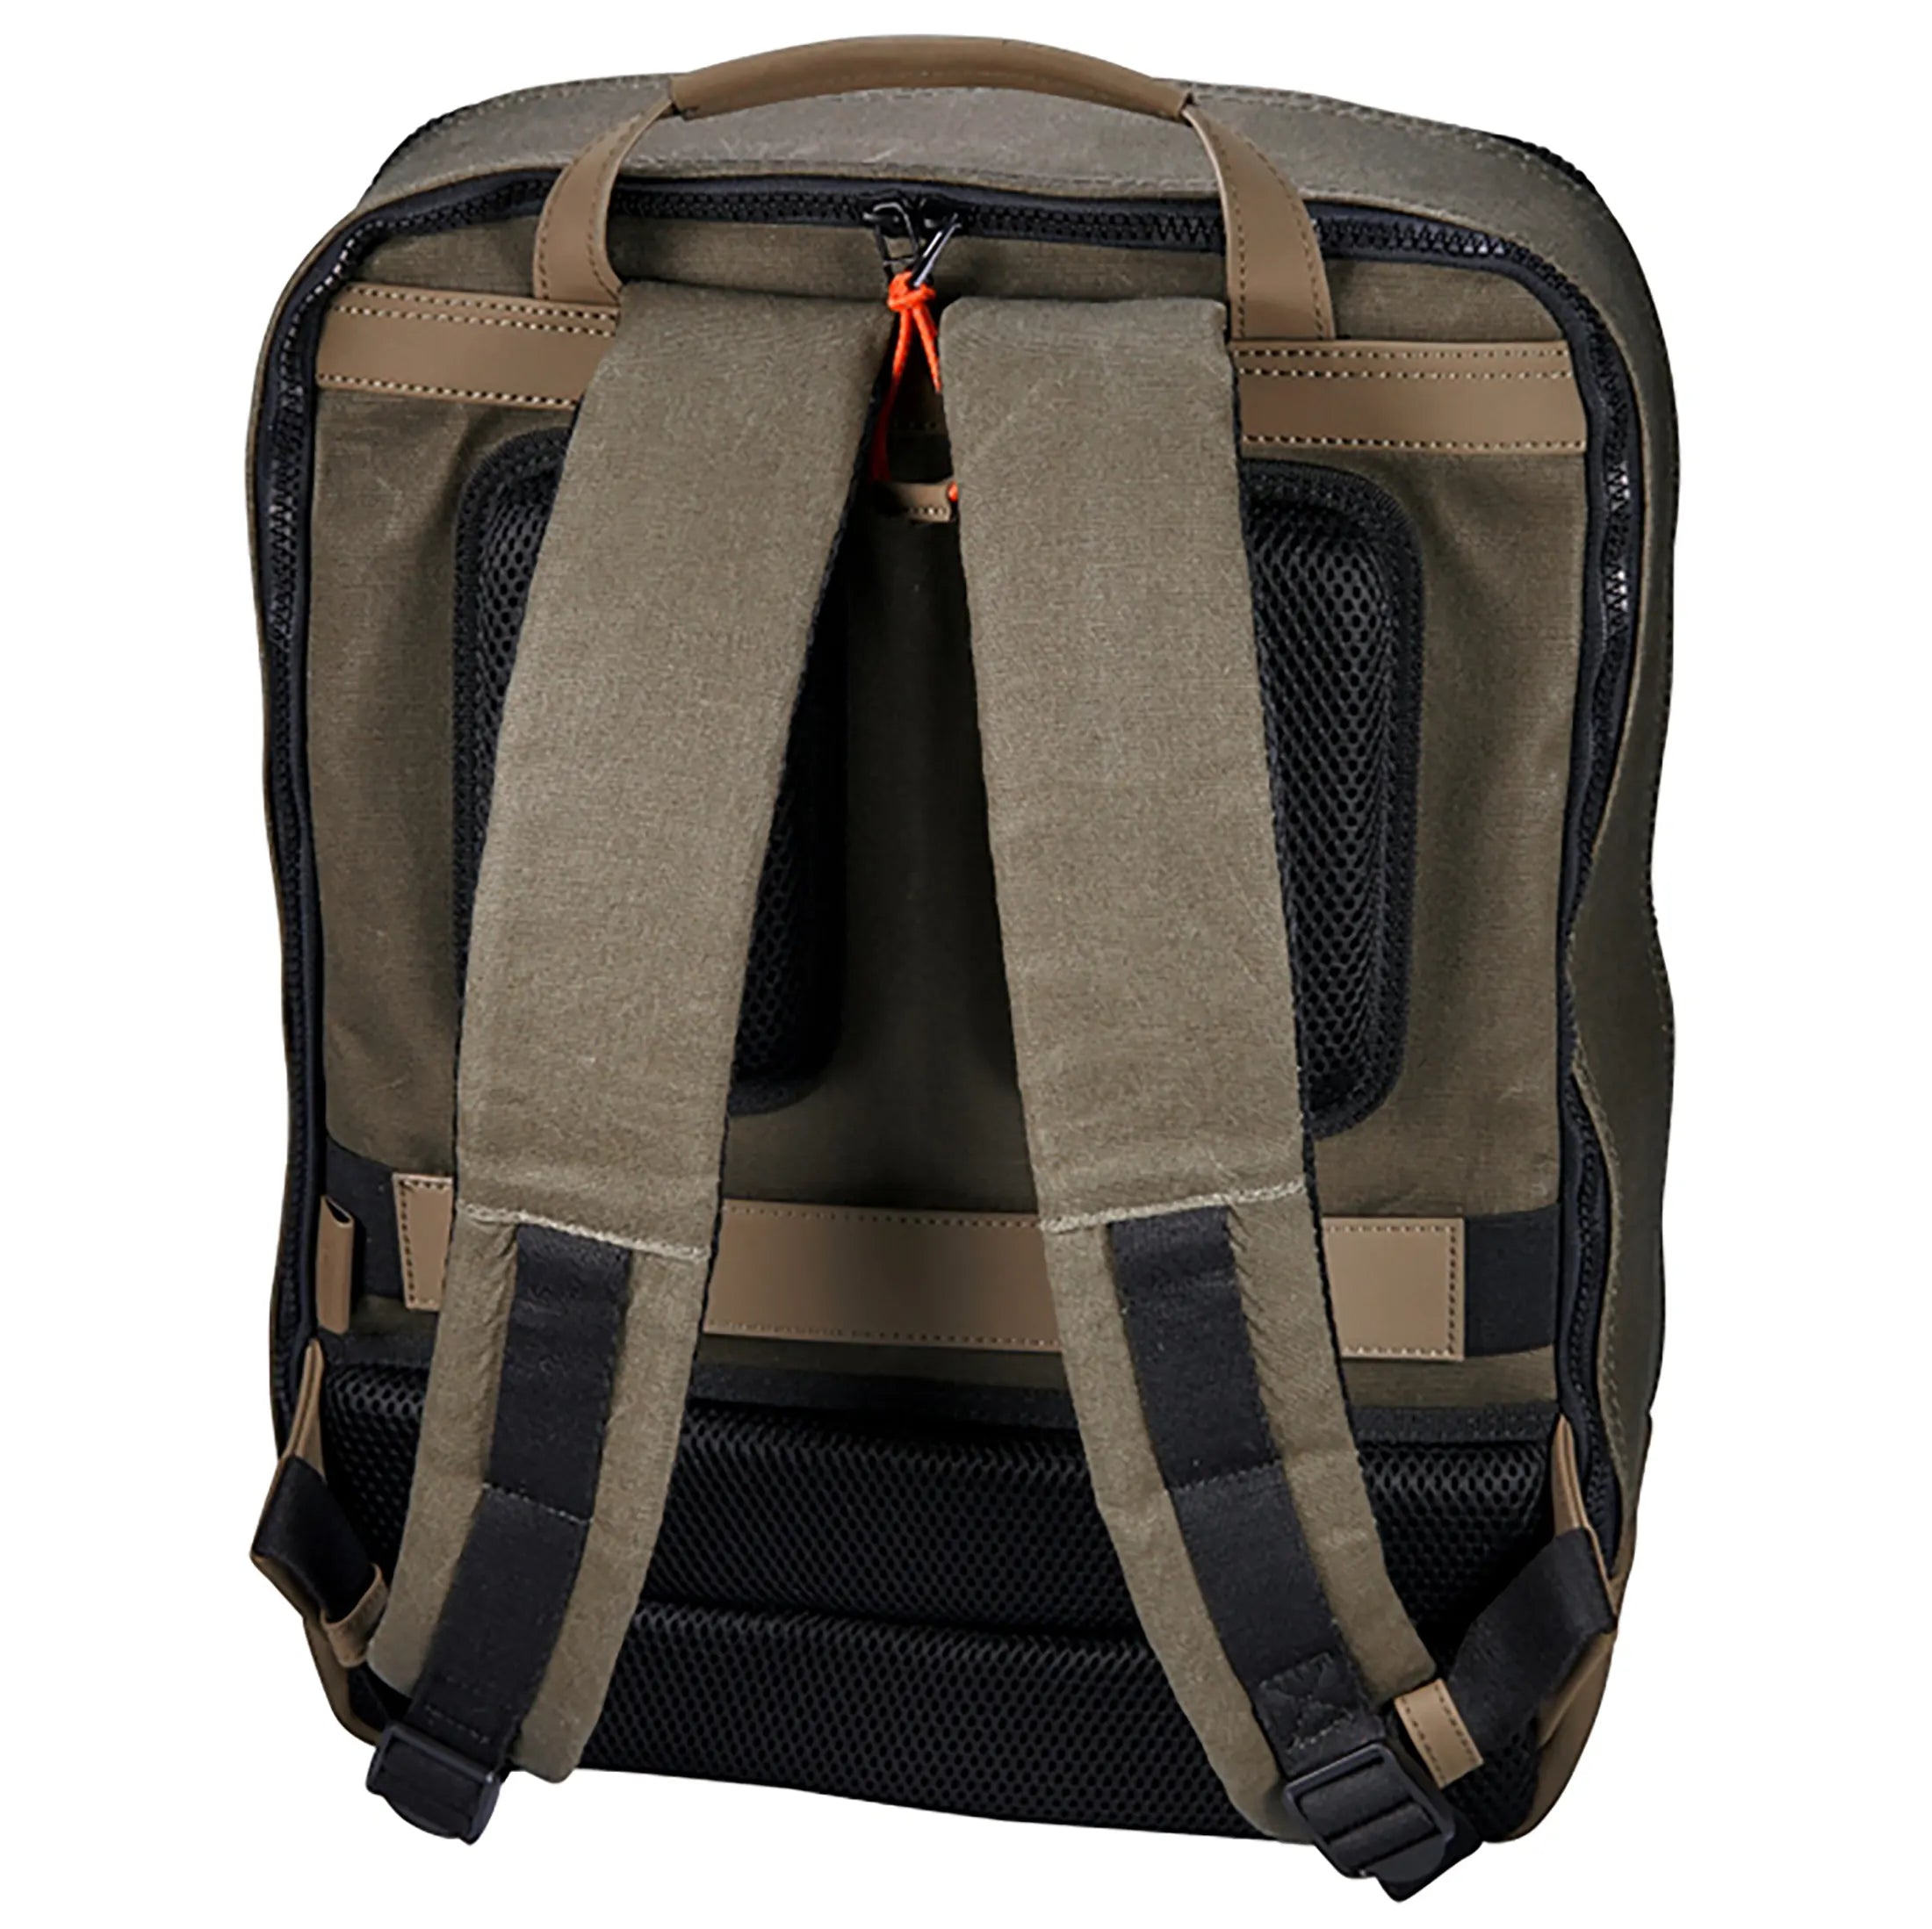 Jost Ystad daypack backpack with laptop compartment 44 cm - olive